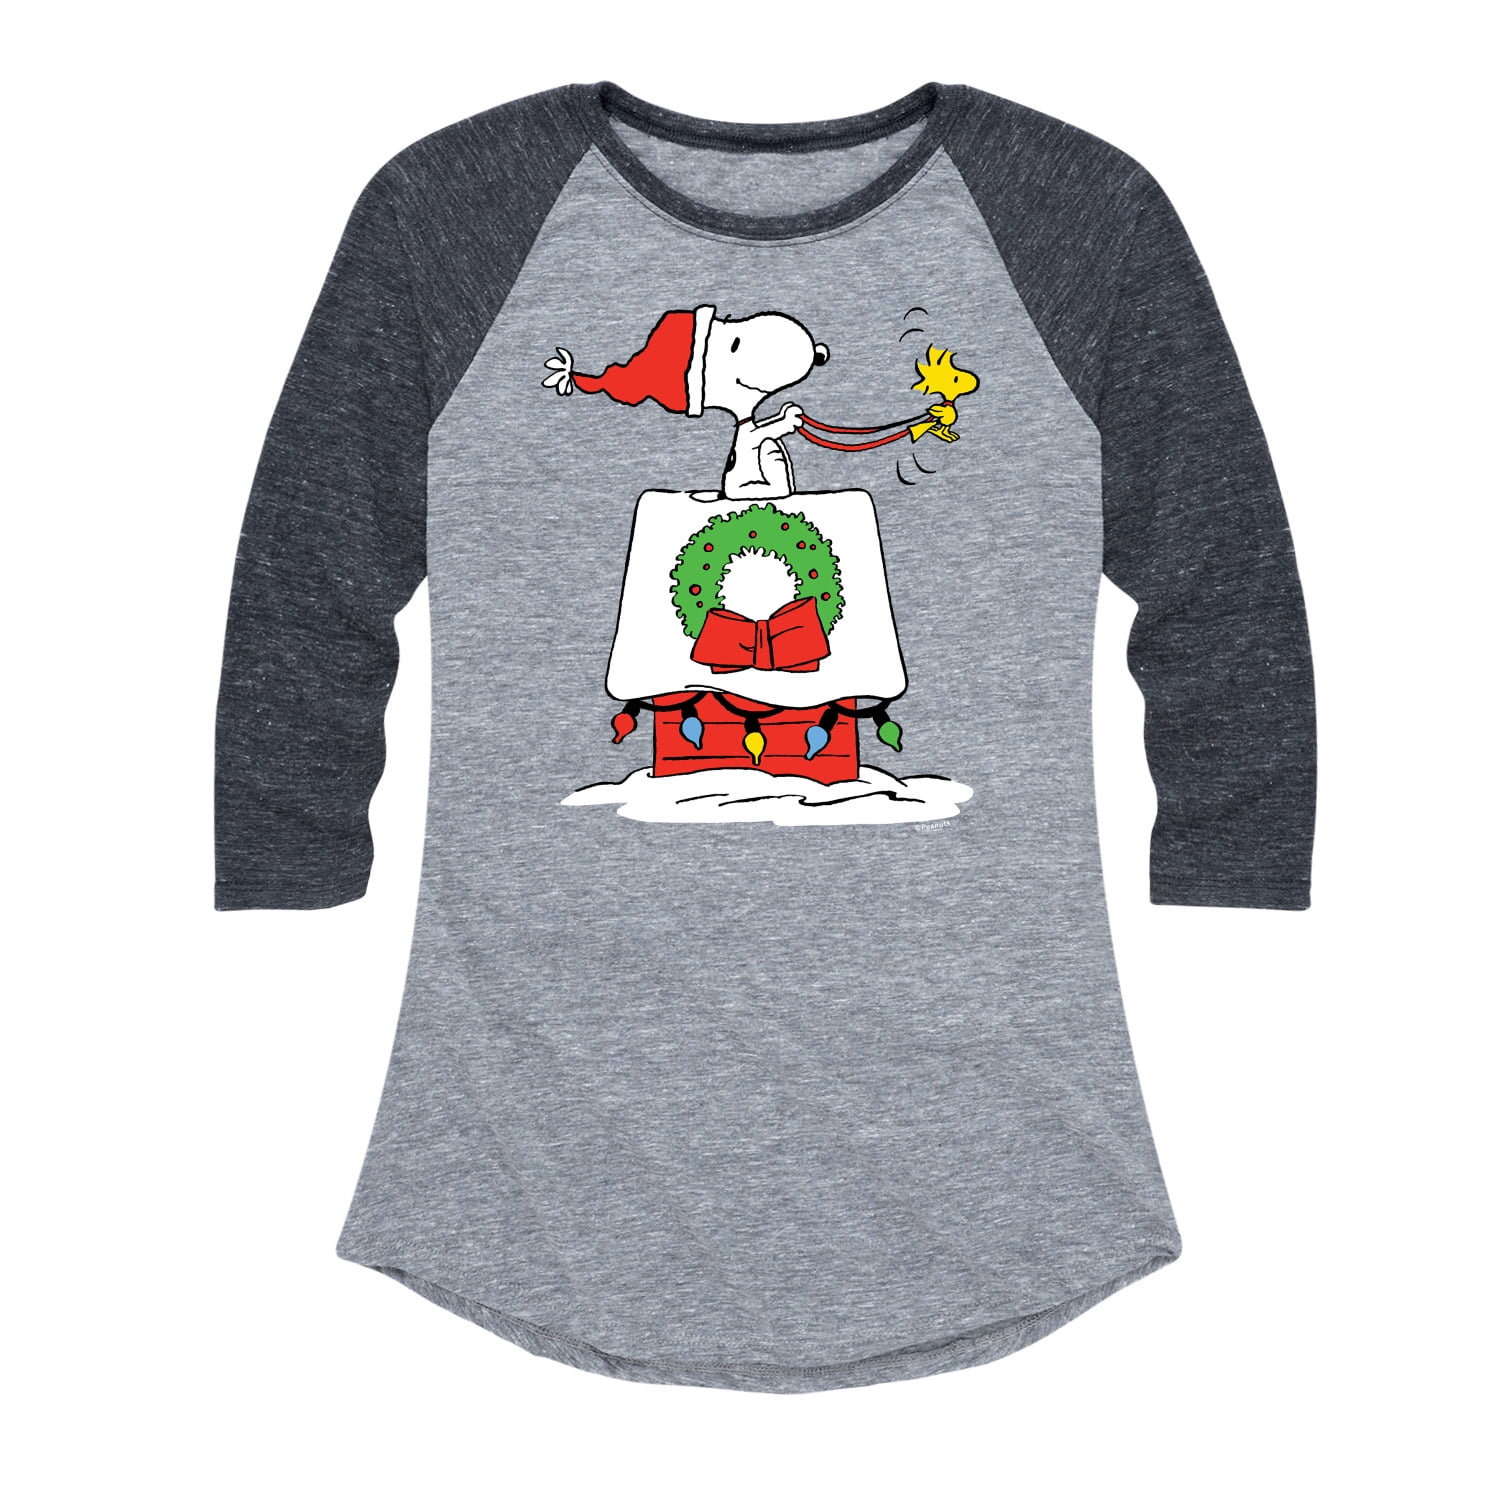 Peanuts - Snoopy and Woodstock House Sleigh - Women's Raglan Graphic T ...